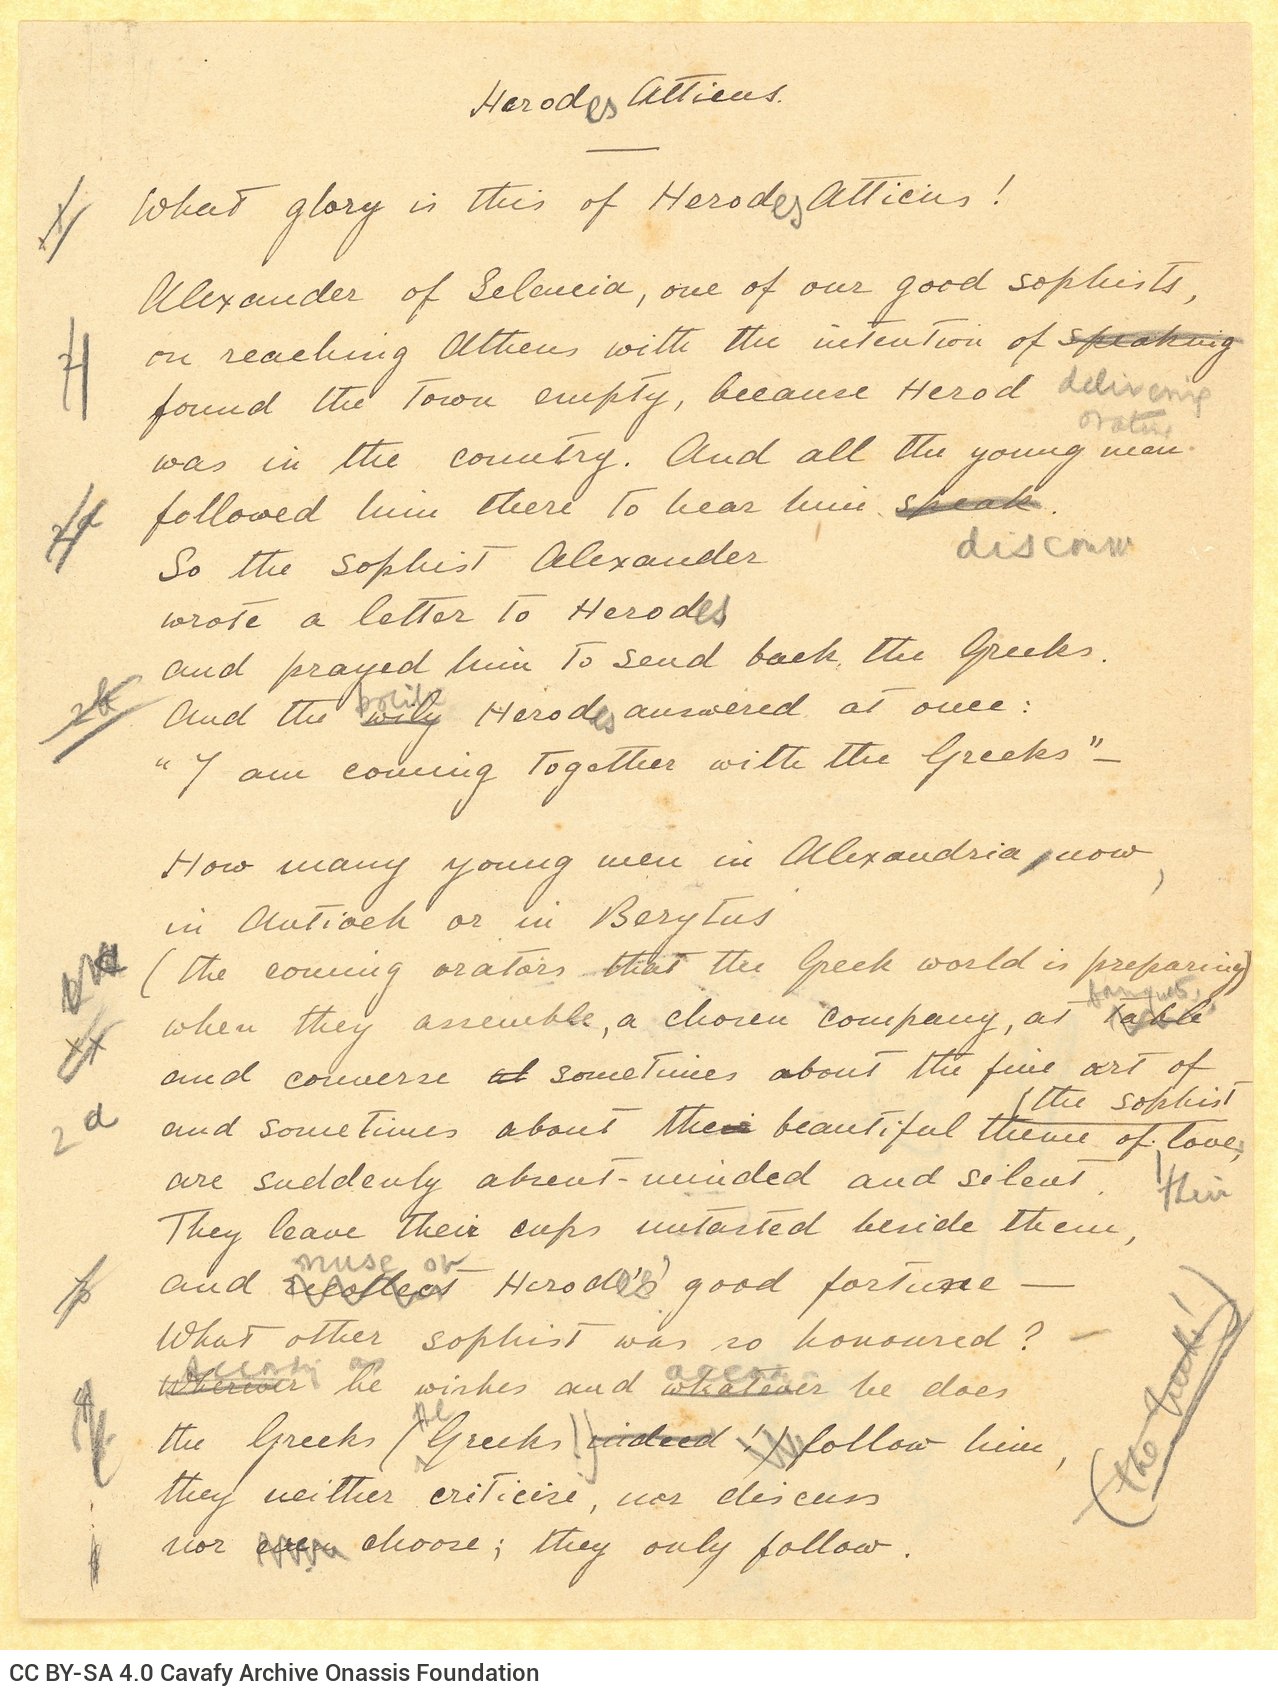 Handwritten English translation of the poem "Herodes Atiicus" by G. Valassopoulo on one side of a sheet. Handwritten notes